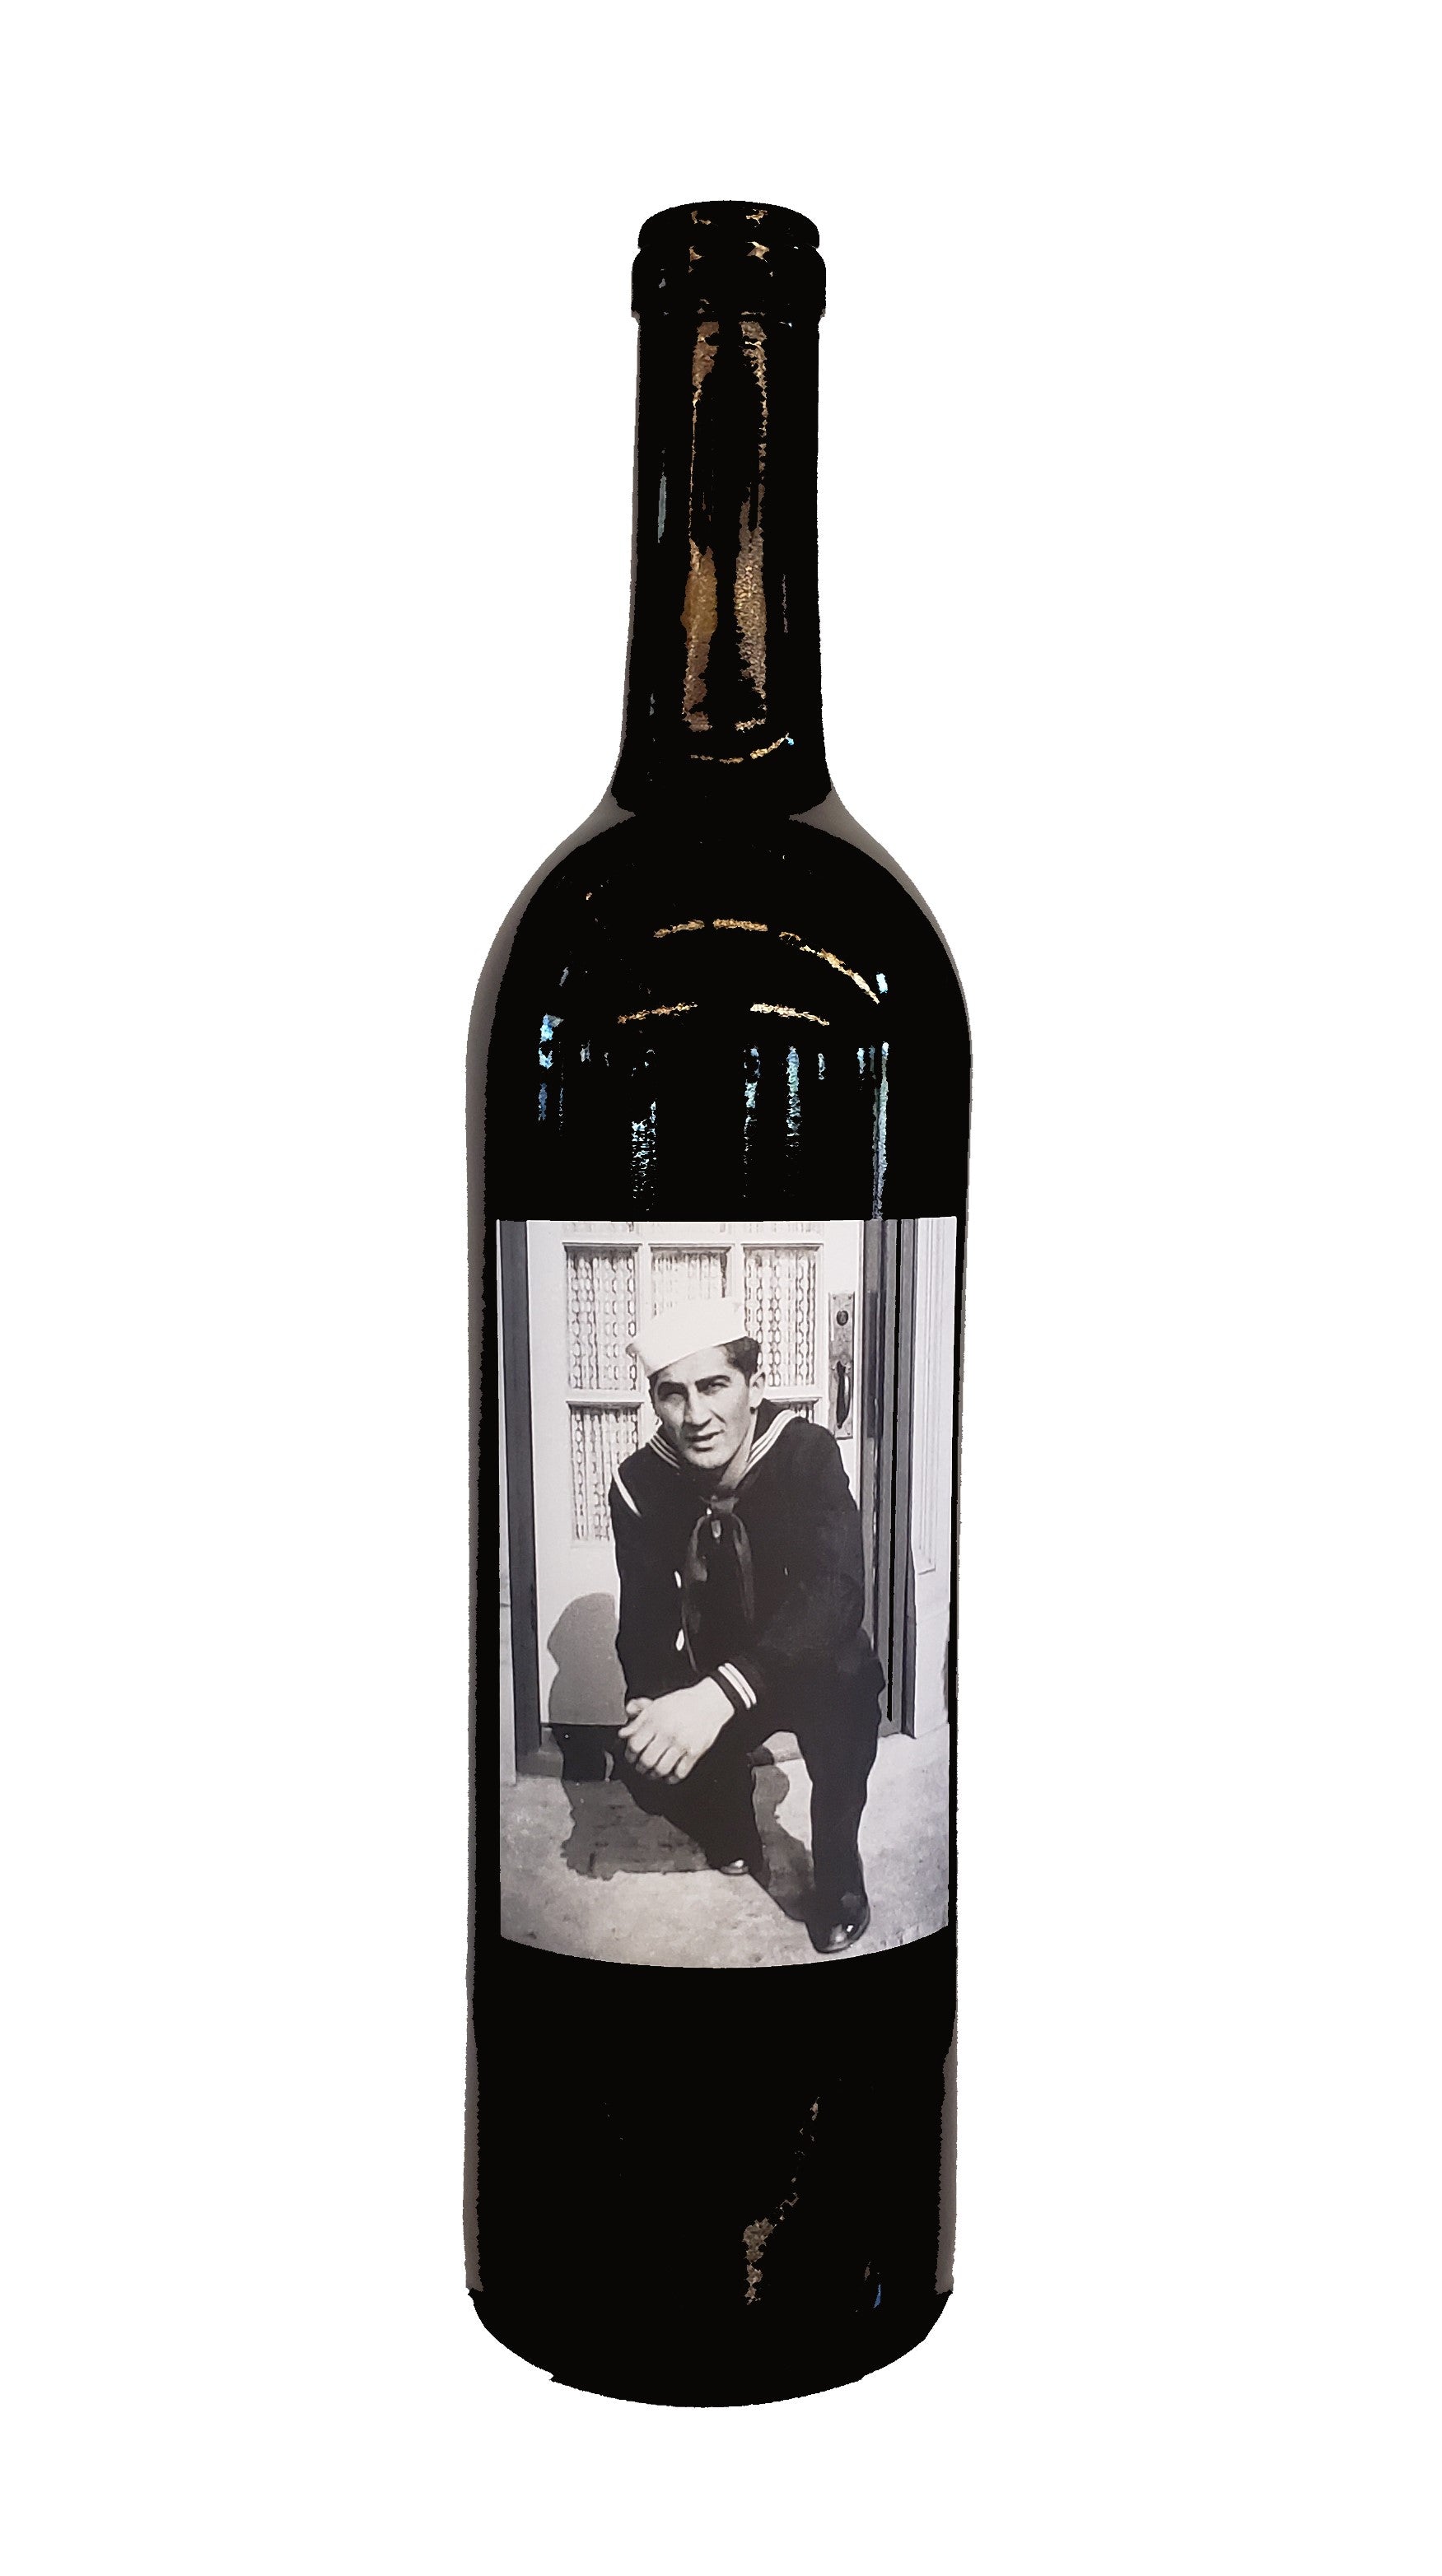 Bordeaux-style bottle with label with a black-and-white photo of man in uniform kneeling on front porch step and looking at the camera.